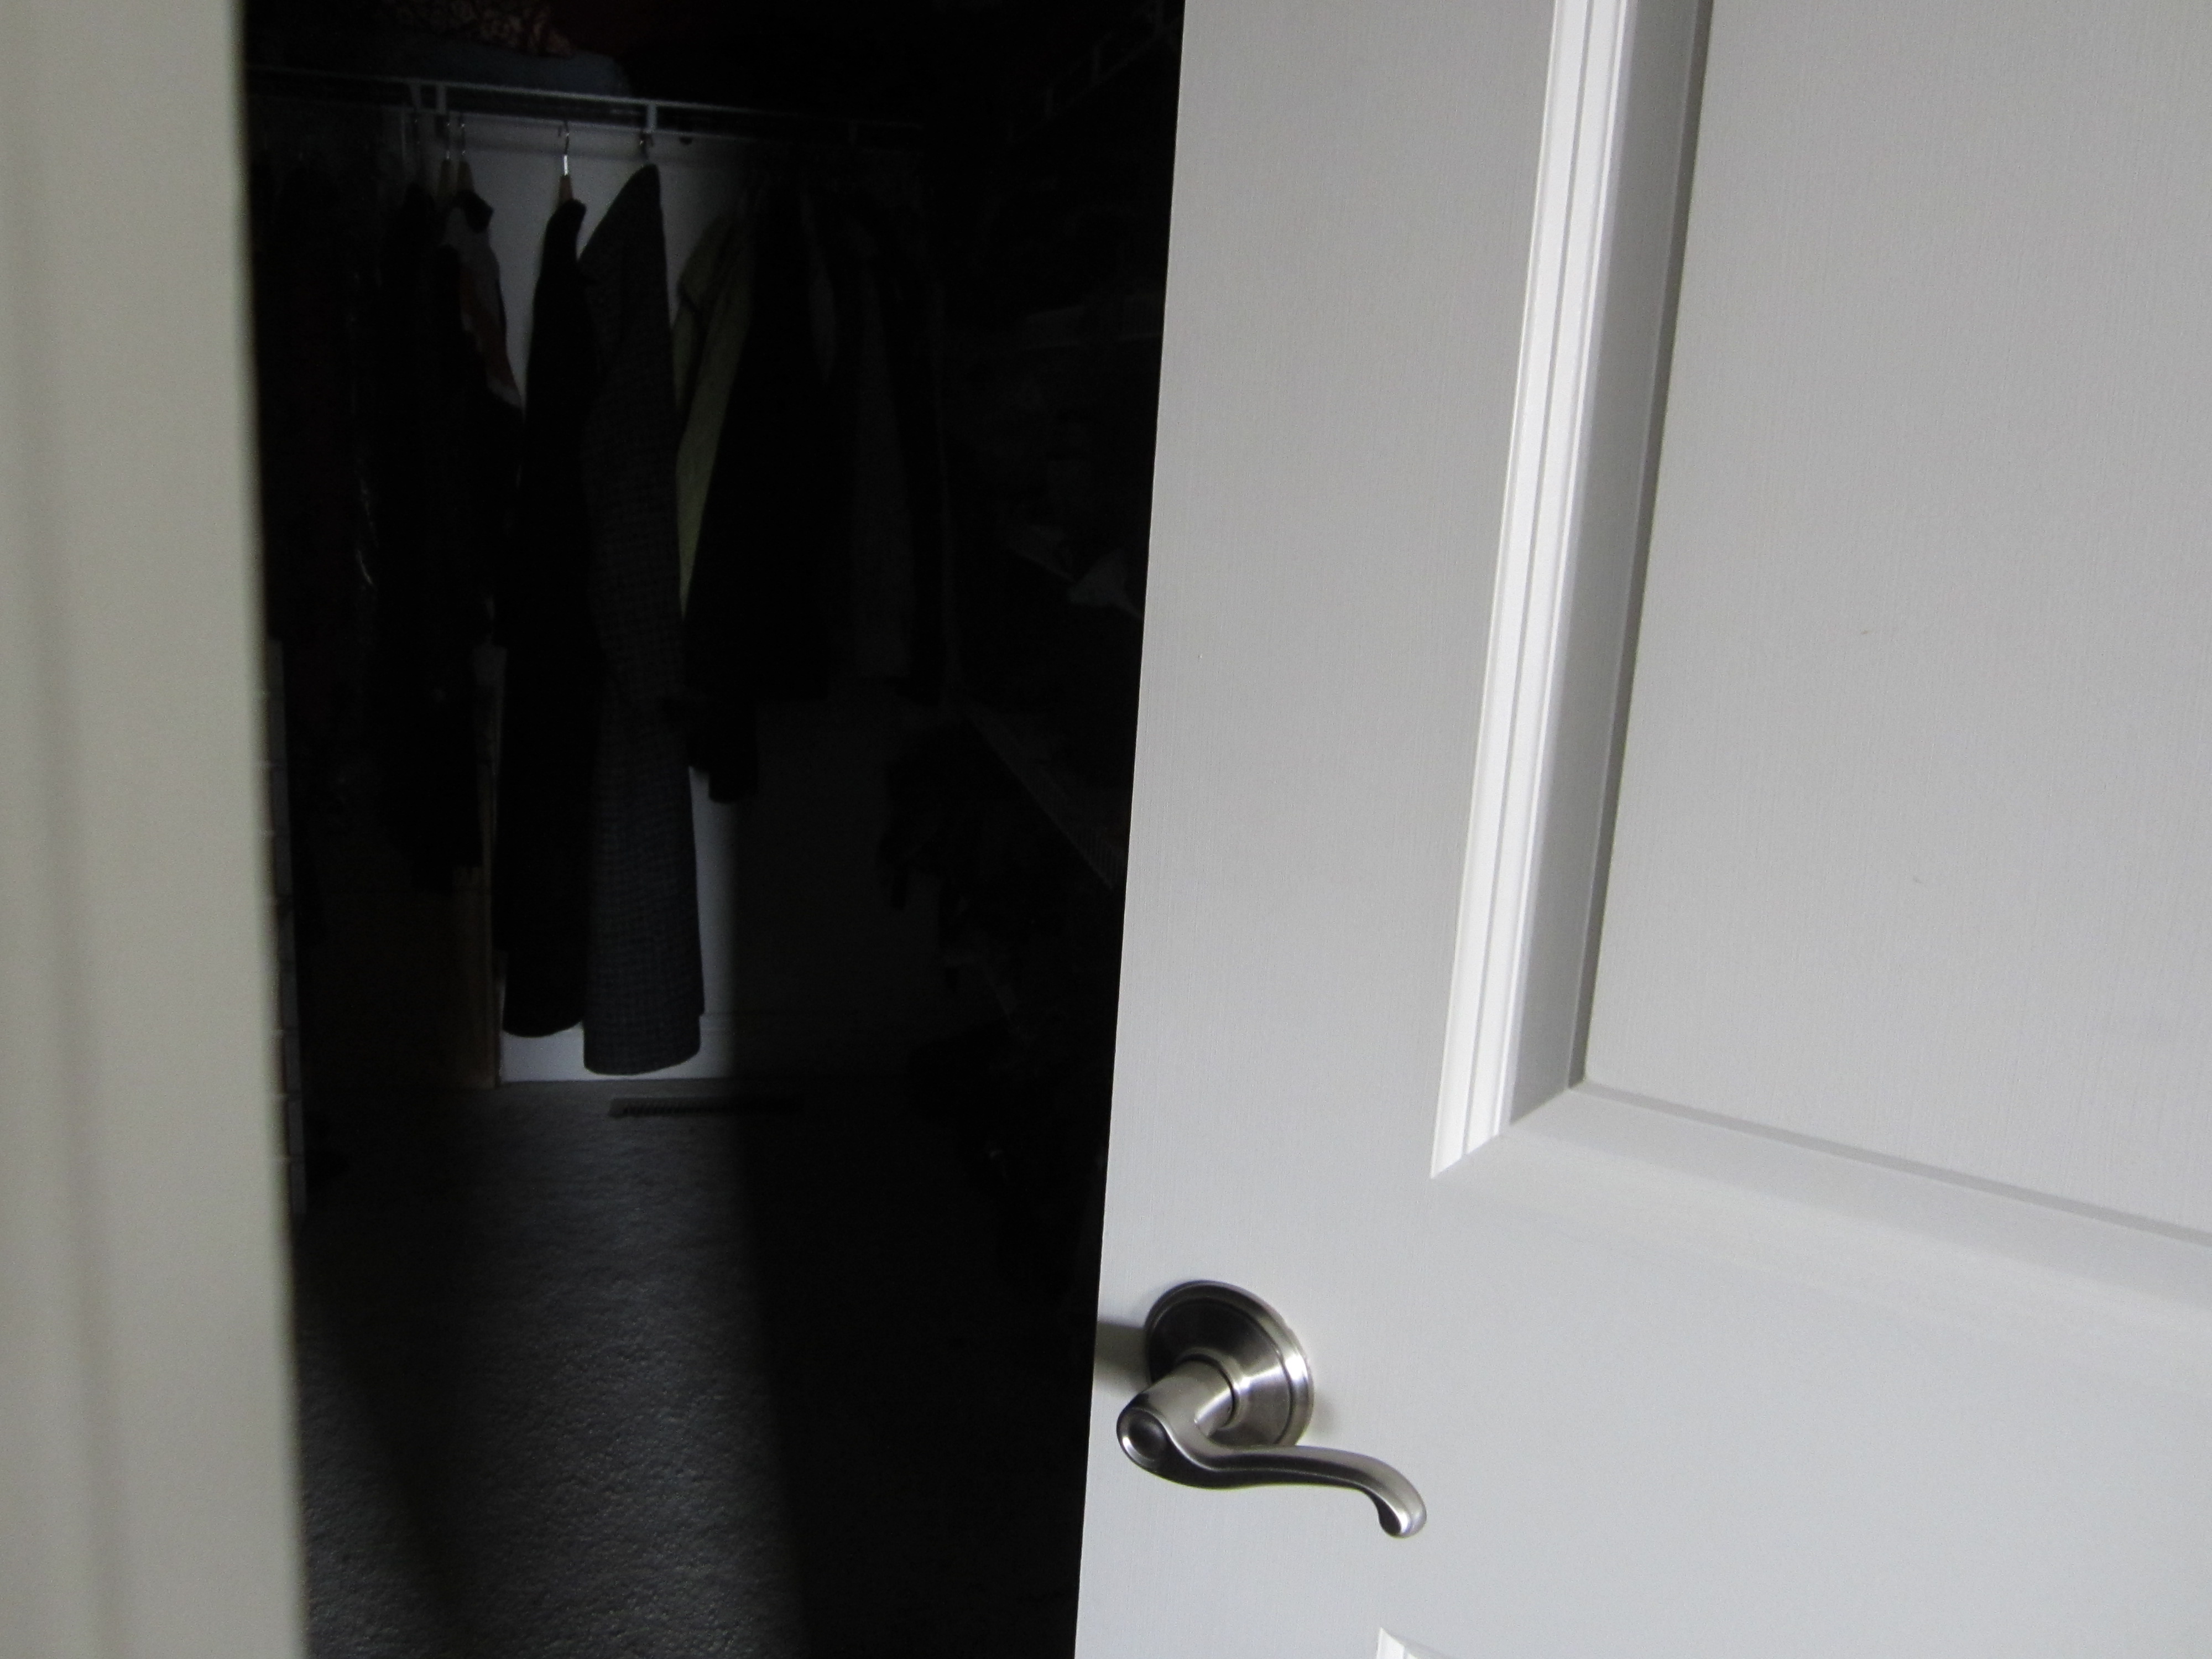 Why you shouldn't hide in your closet - PAMELA HODGES